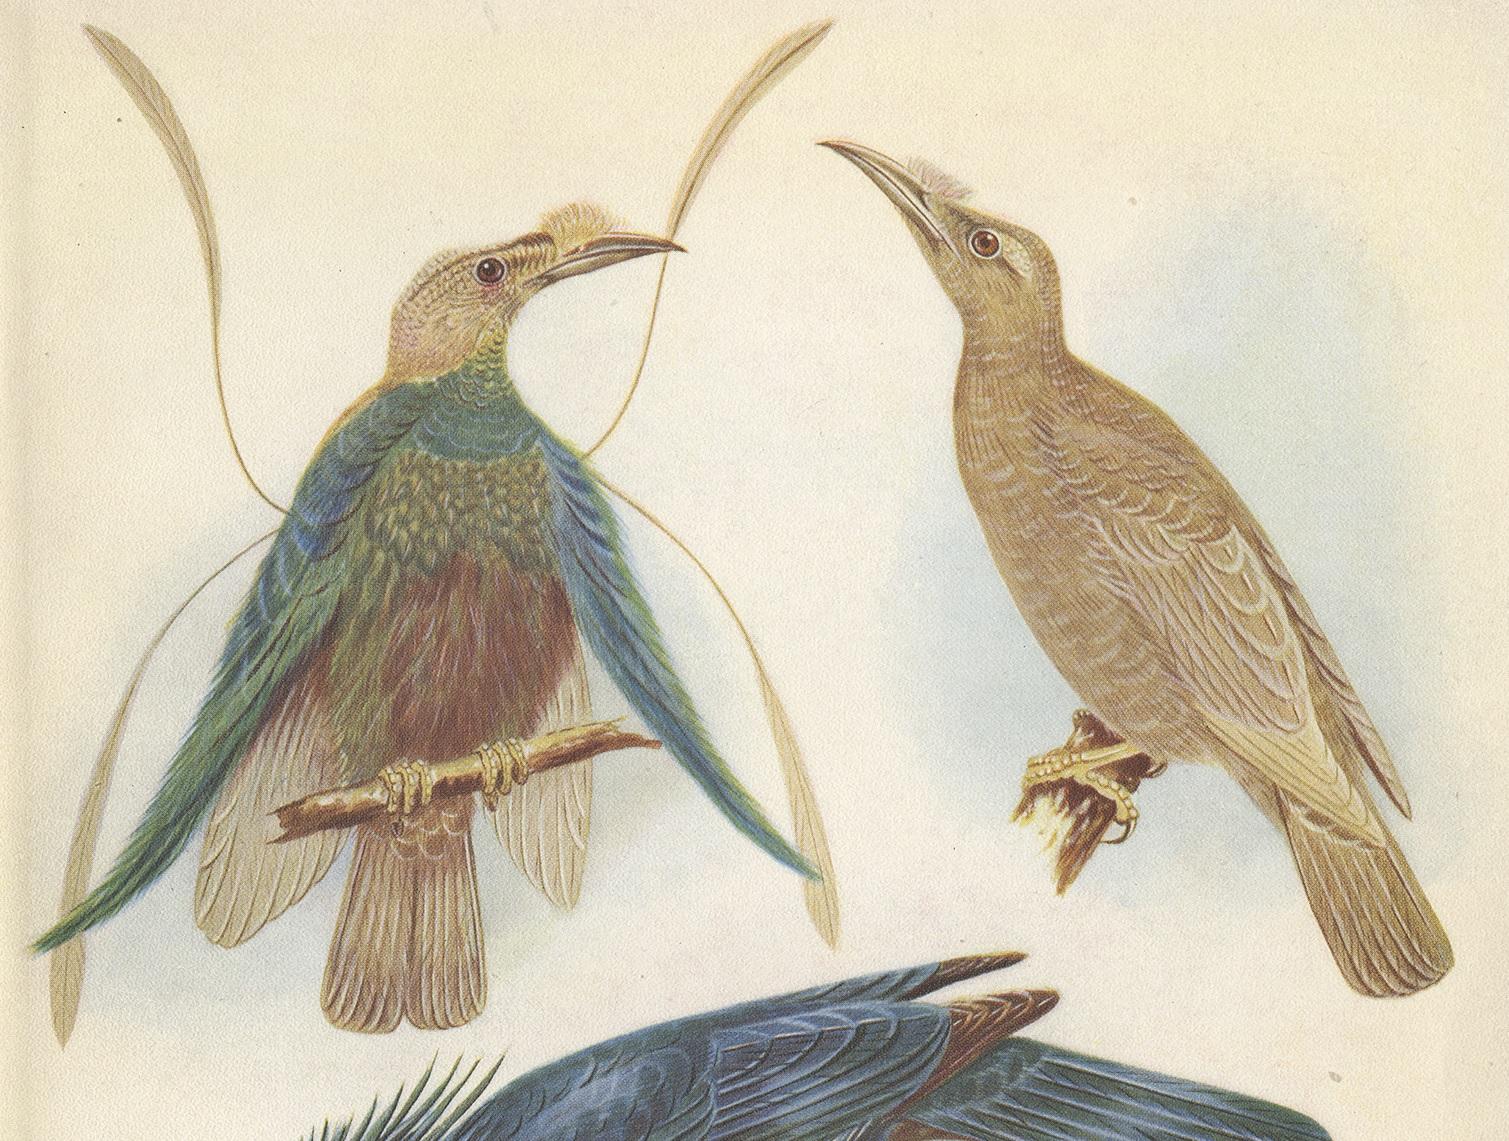 Decorative print illustrating the standard-wing and the trumpet bird. This authentic print originates from 'Birds of Paradise and Bower Birds' by Tom Iredale. With colored illustrations of Every Species by Lilian Medland. Published in 1950.